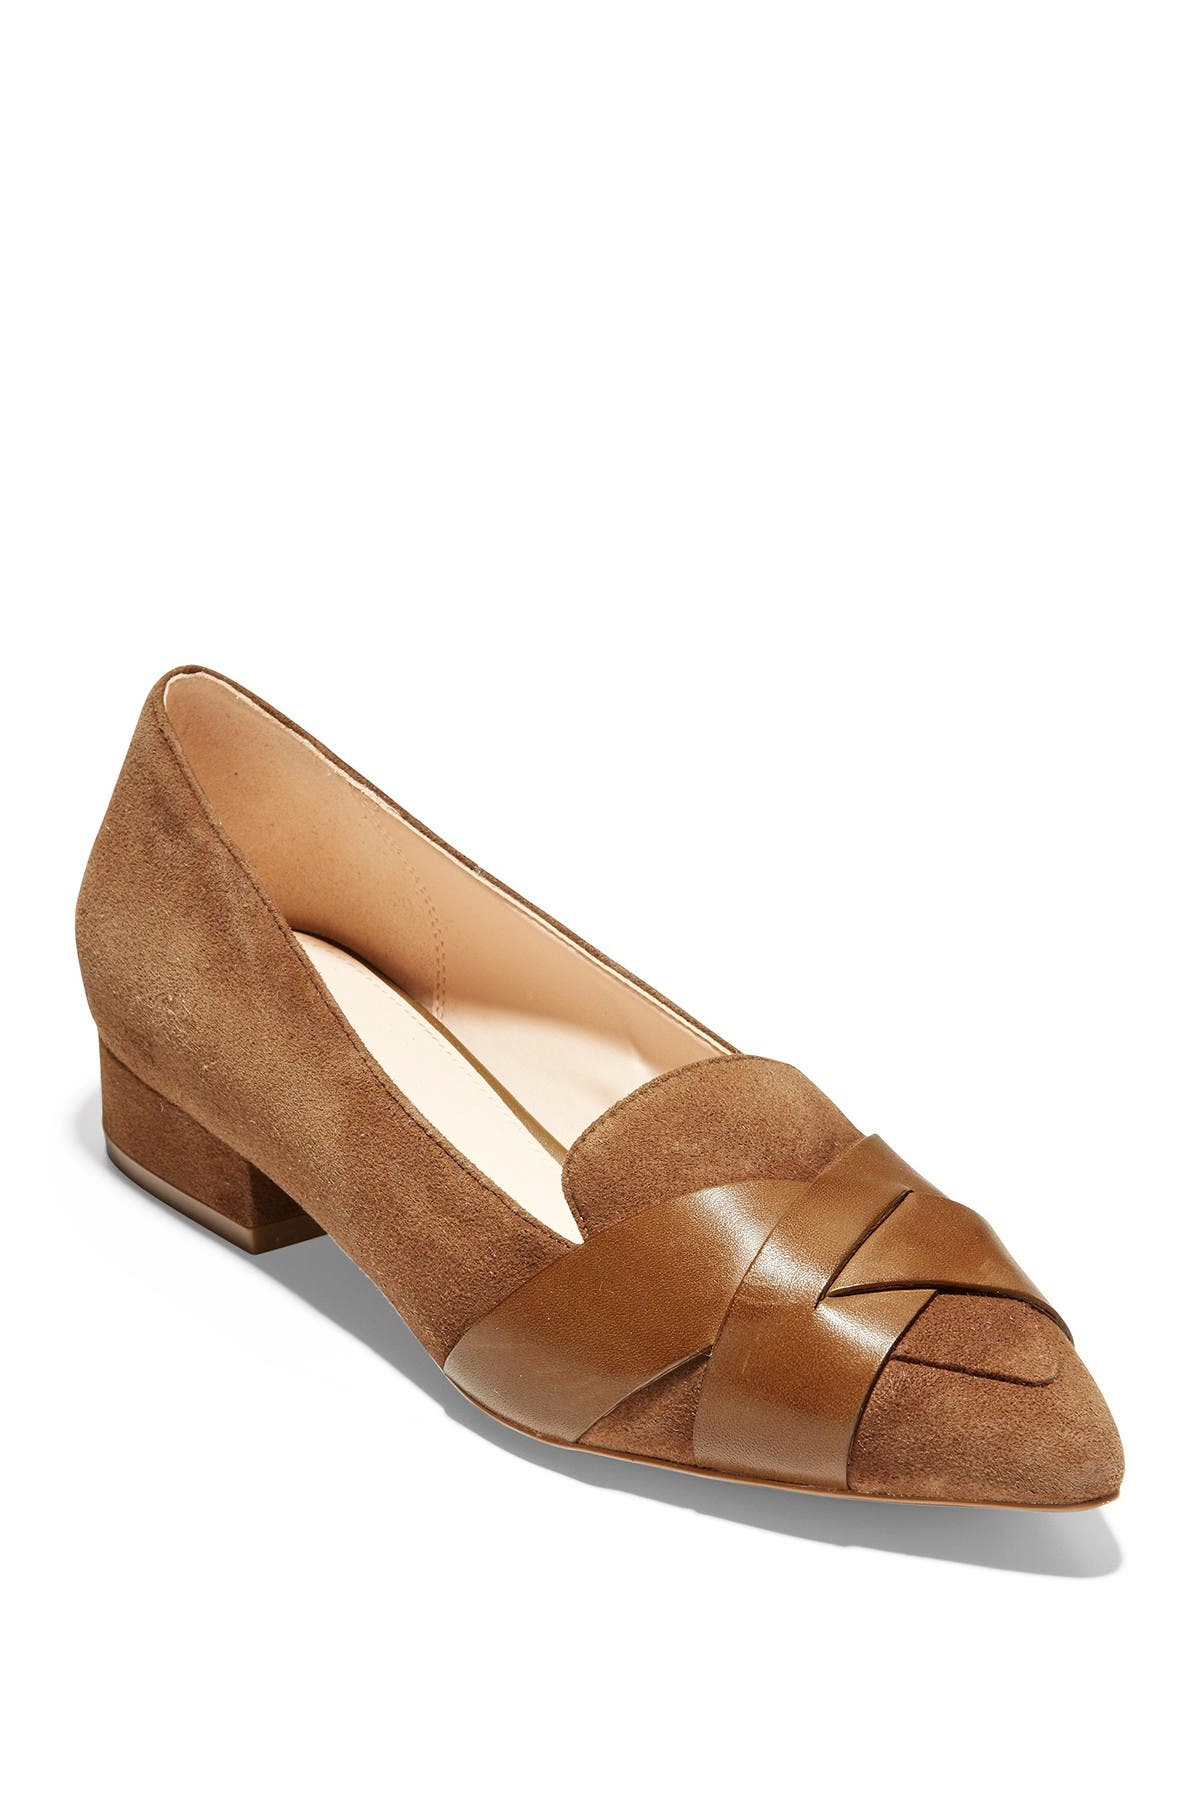 Camila Suede Leather Skimmer Flat 